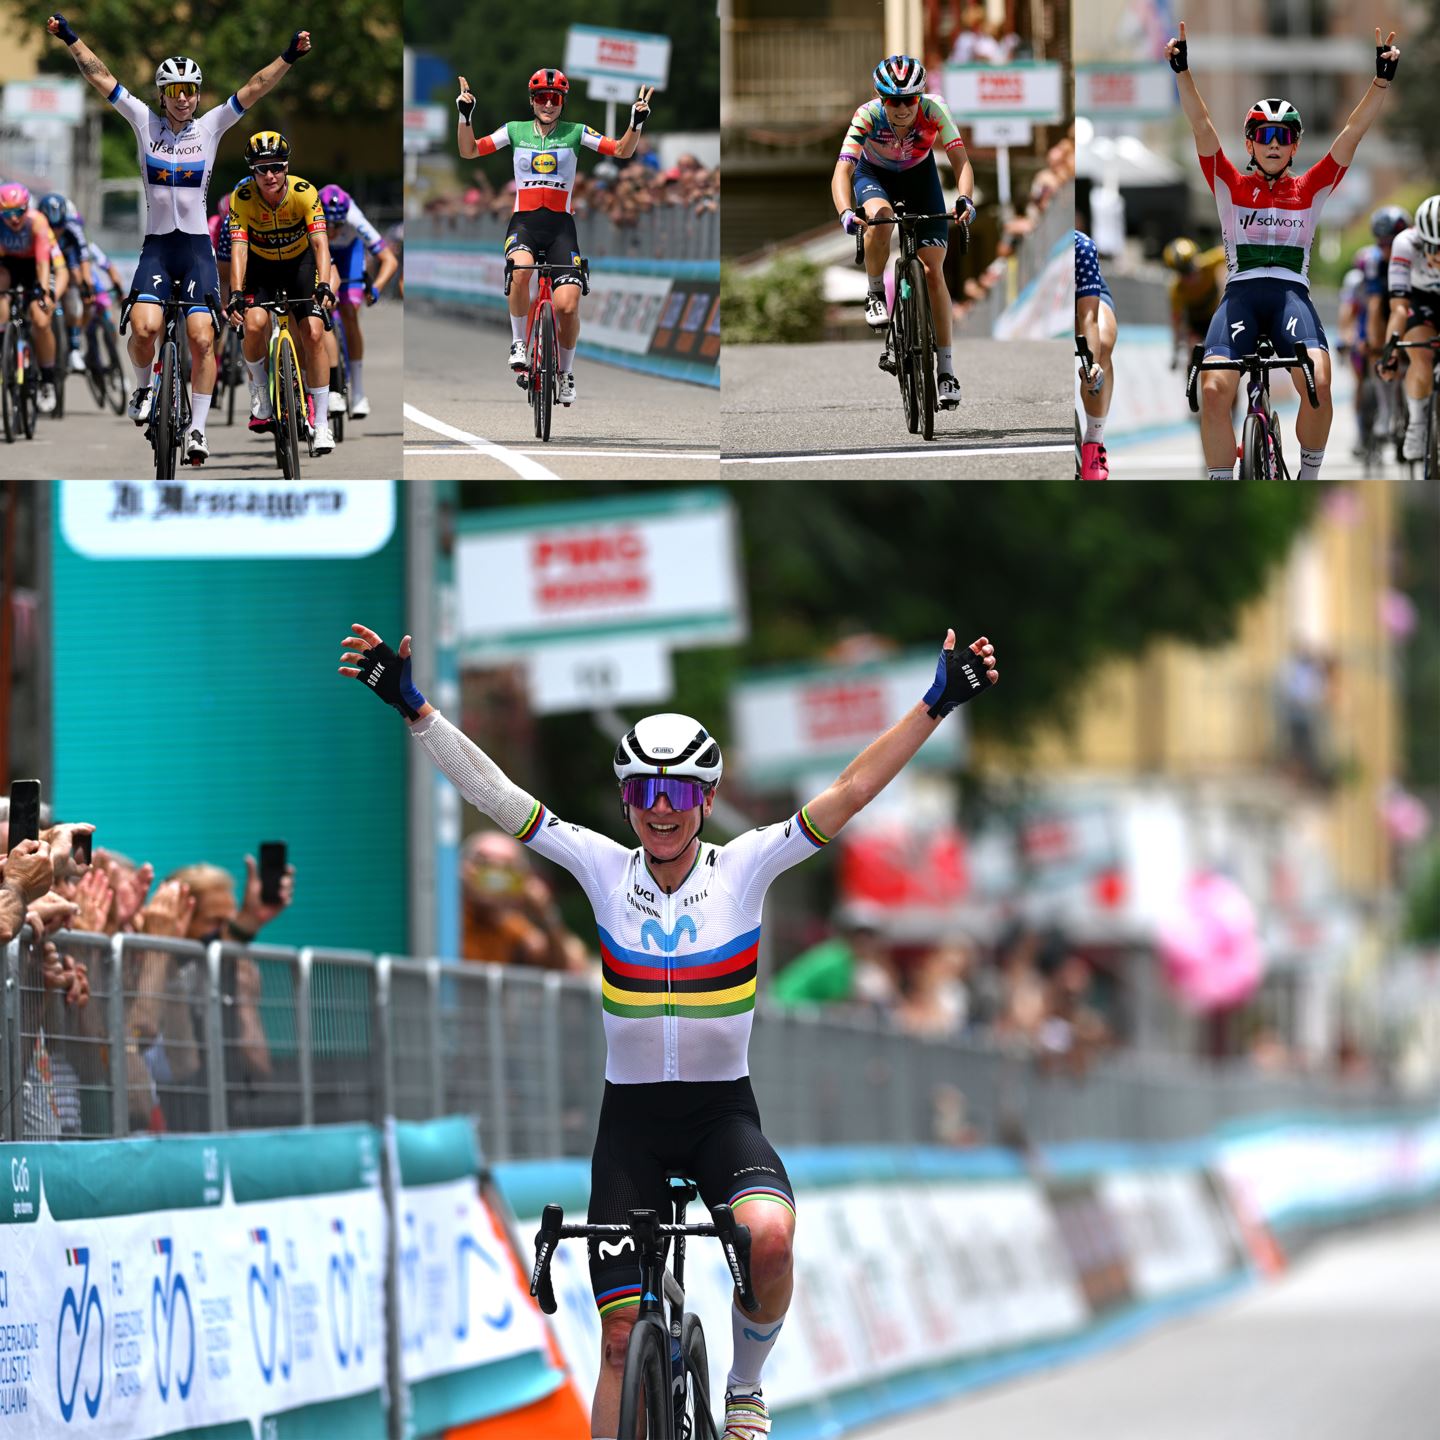 SRAM riders won 7 of 8 Giro Donne stages.